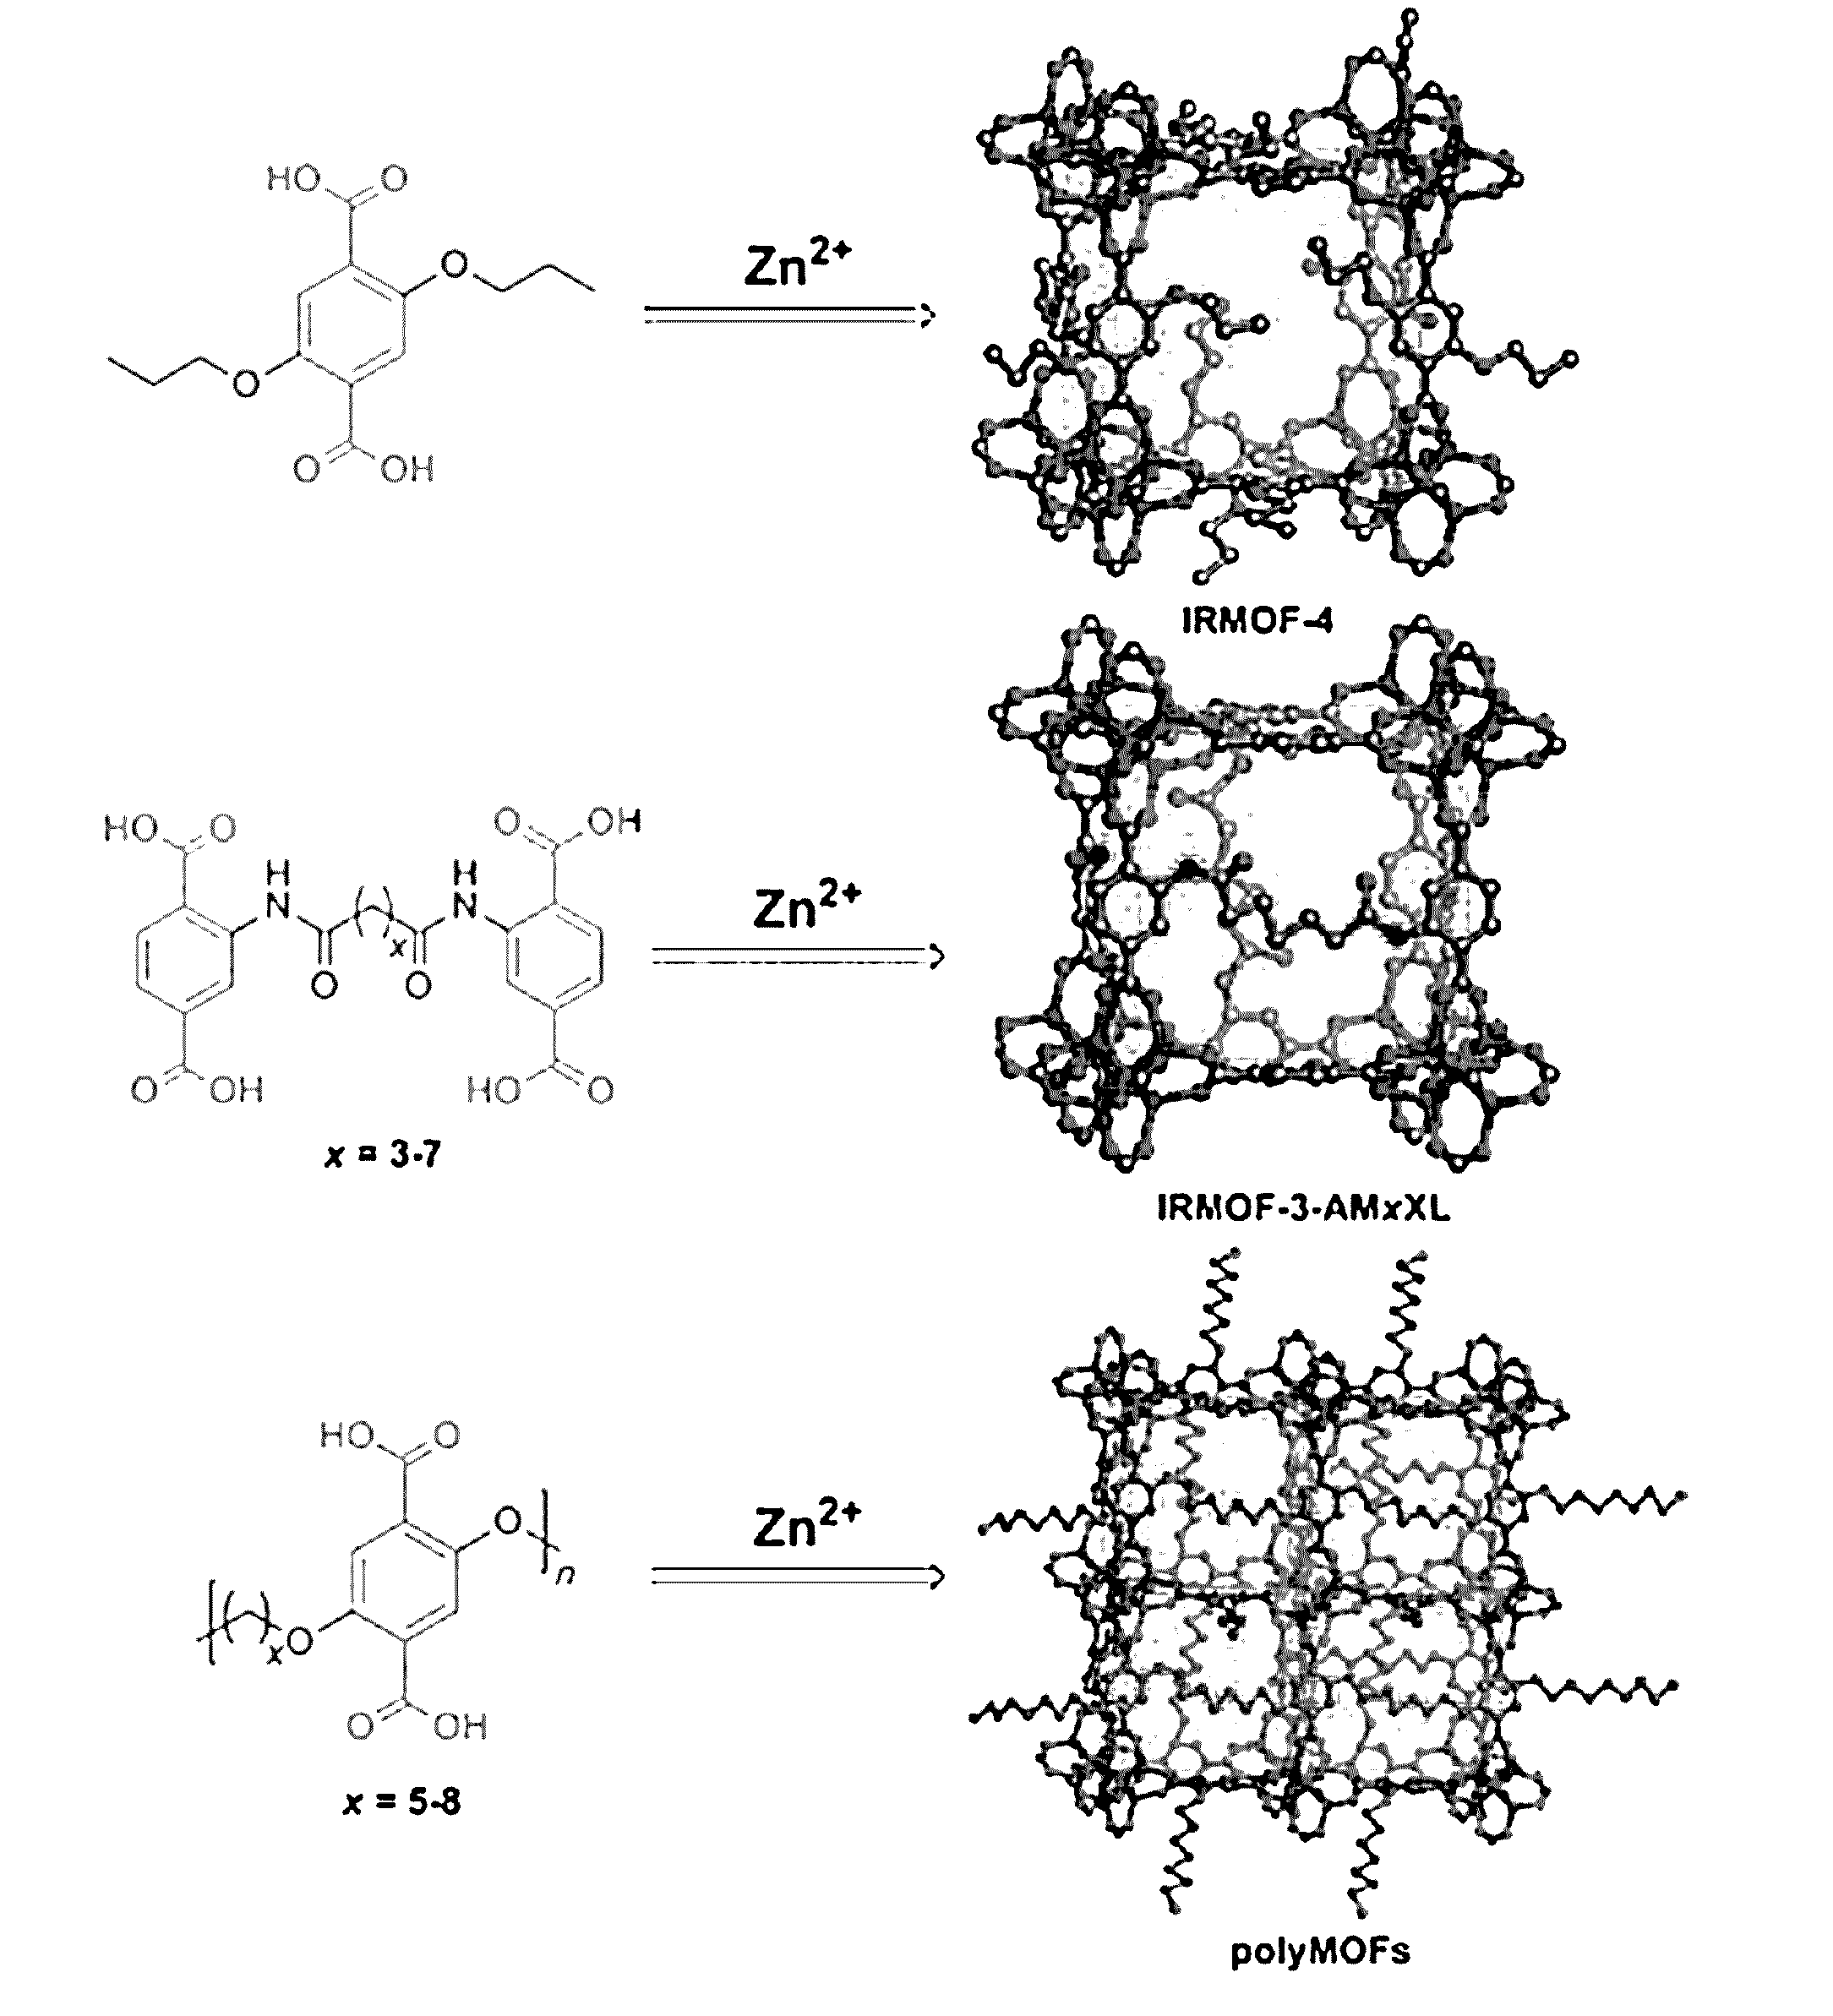 Polymer-metal organic framework materials and methods of using the same